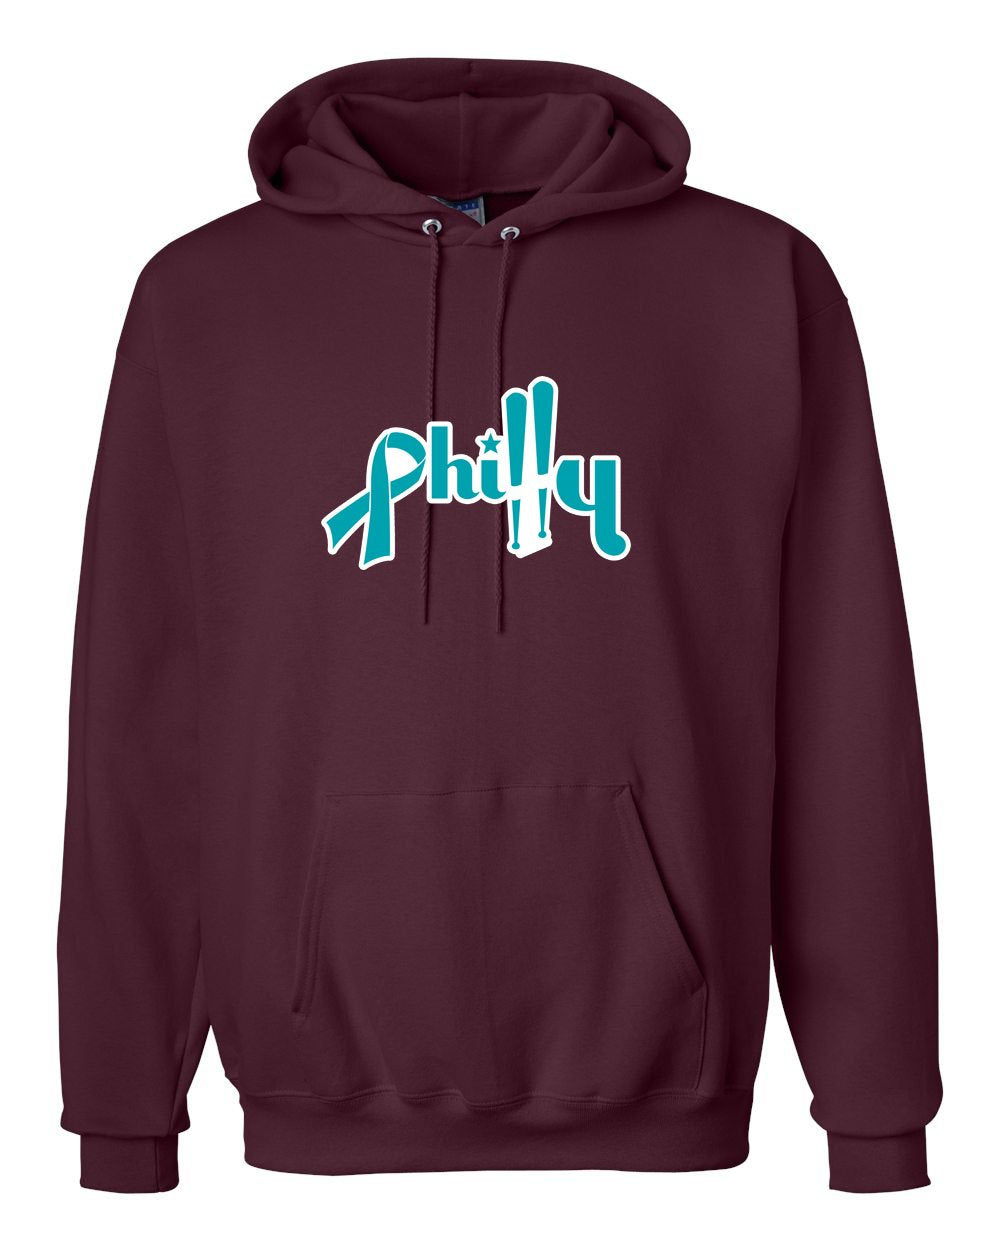 Ovarian Philly Hoodie